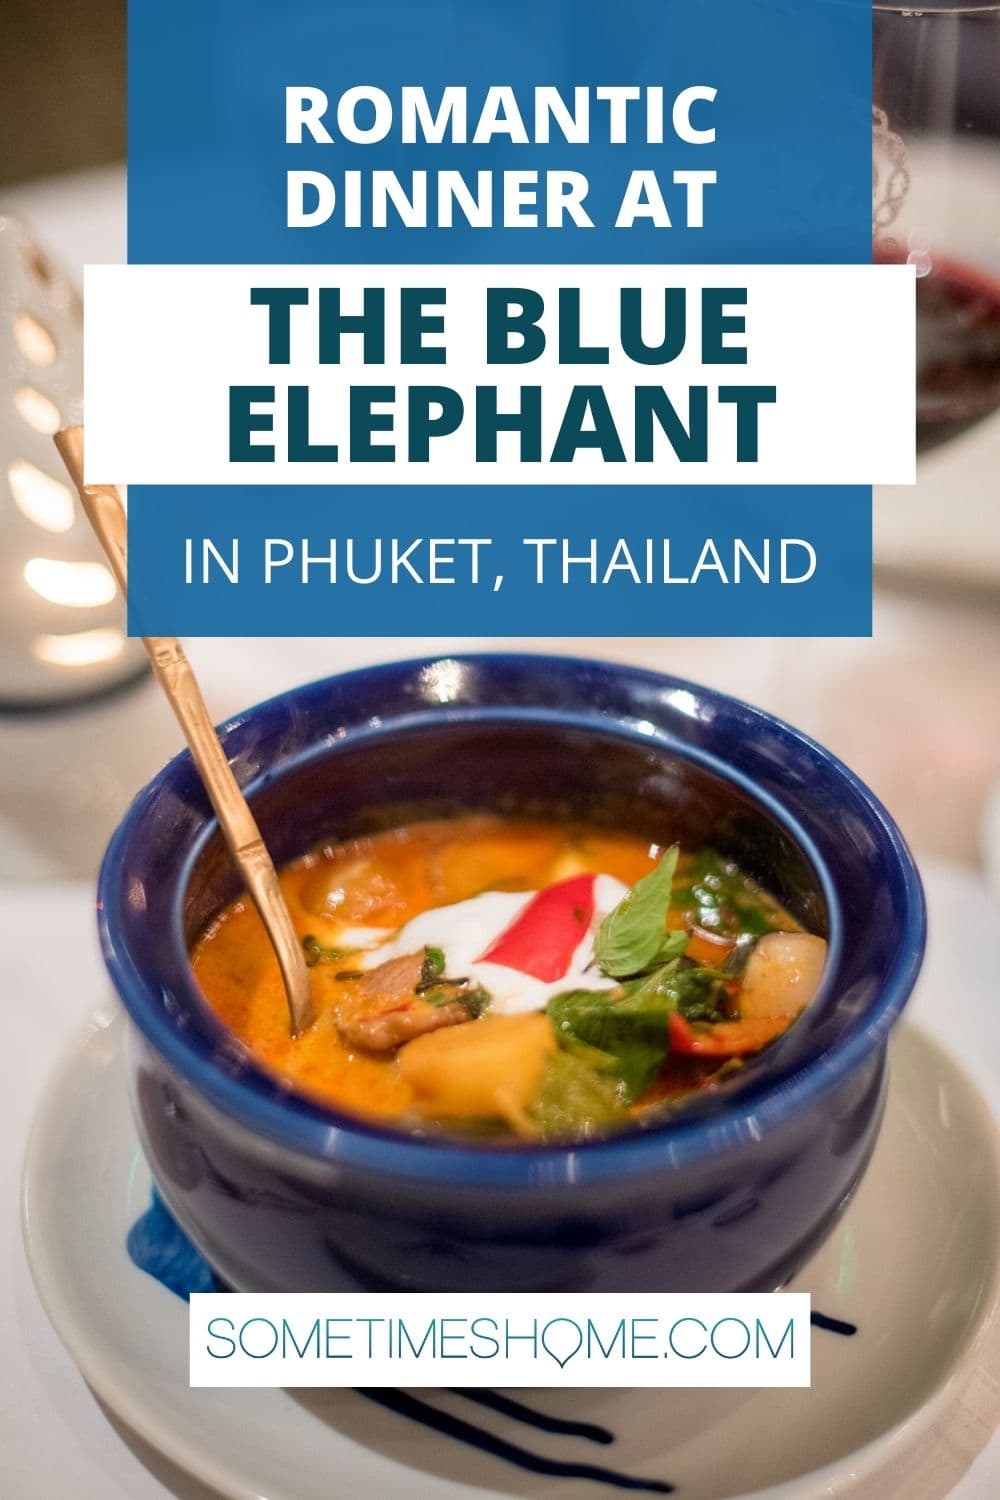 Romantic dinner at The Blue Elephant, in Phuket, Thailand, with a photo of red curry in a blue clay pot.